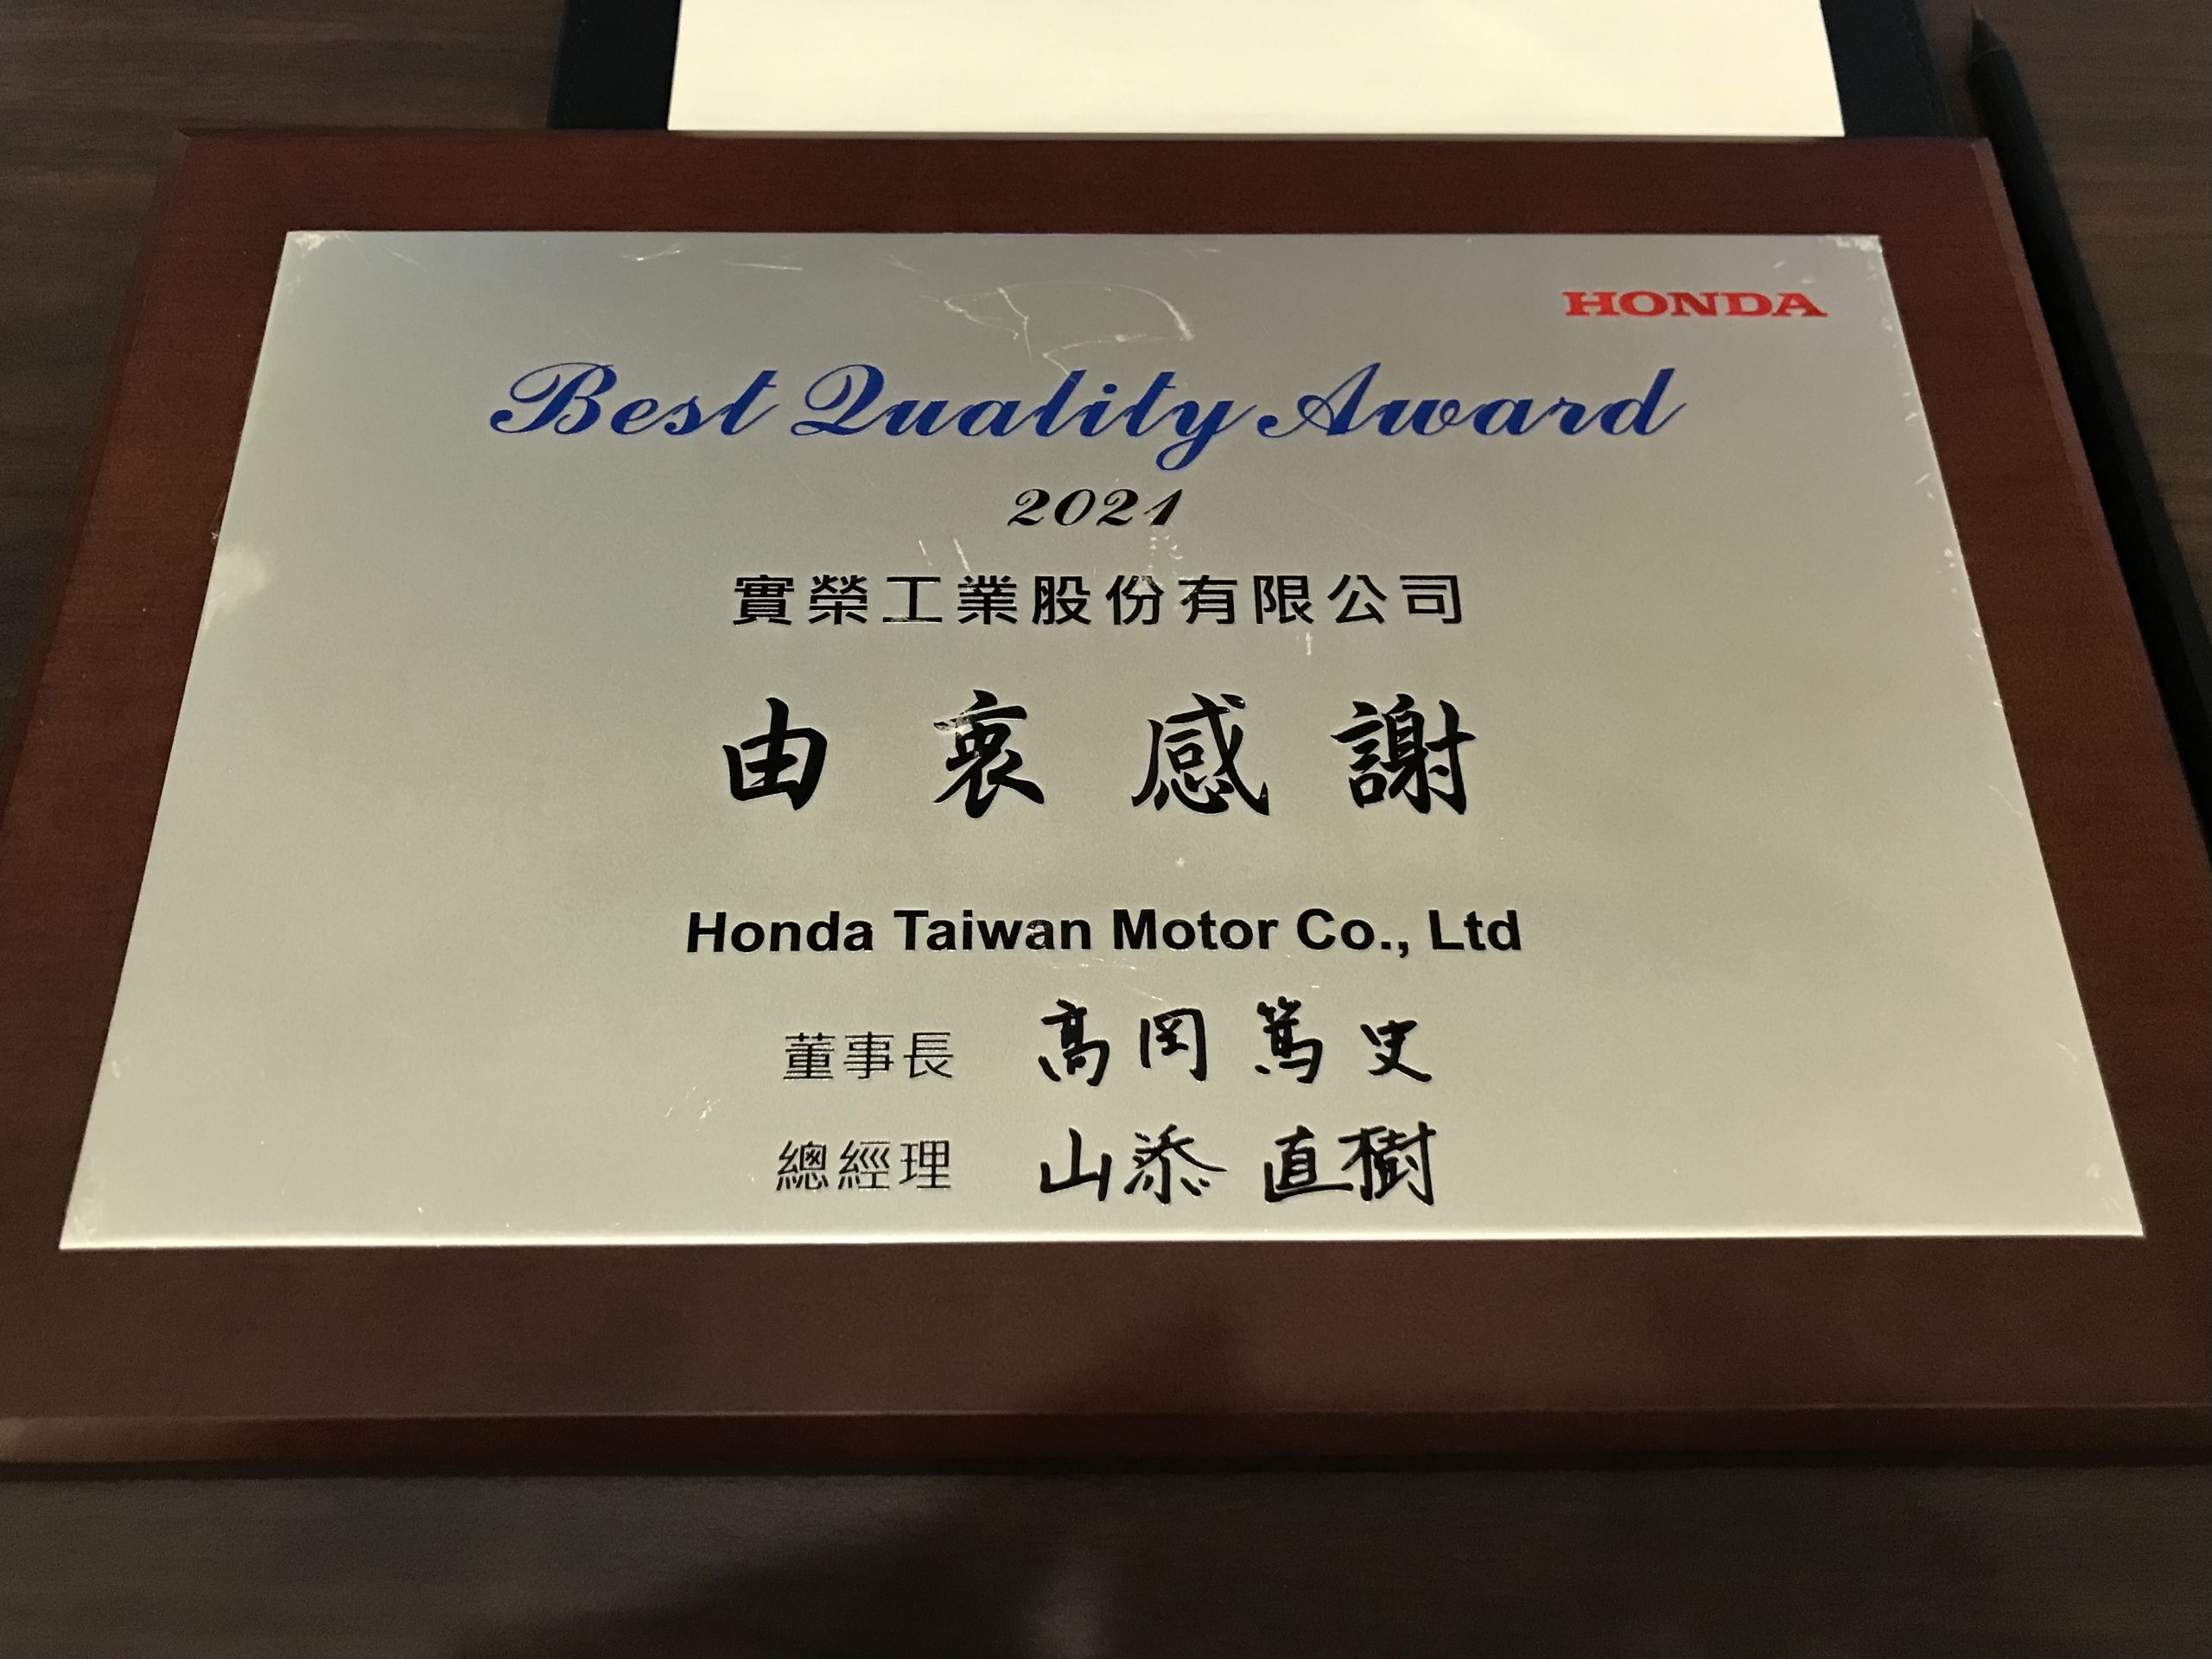 Won the “Best Quality Award” in the 2021 Taiwan Honda Automobile…